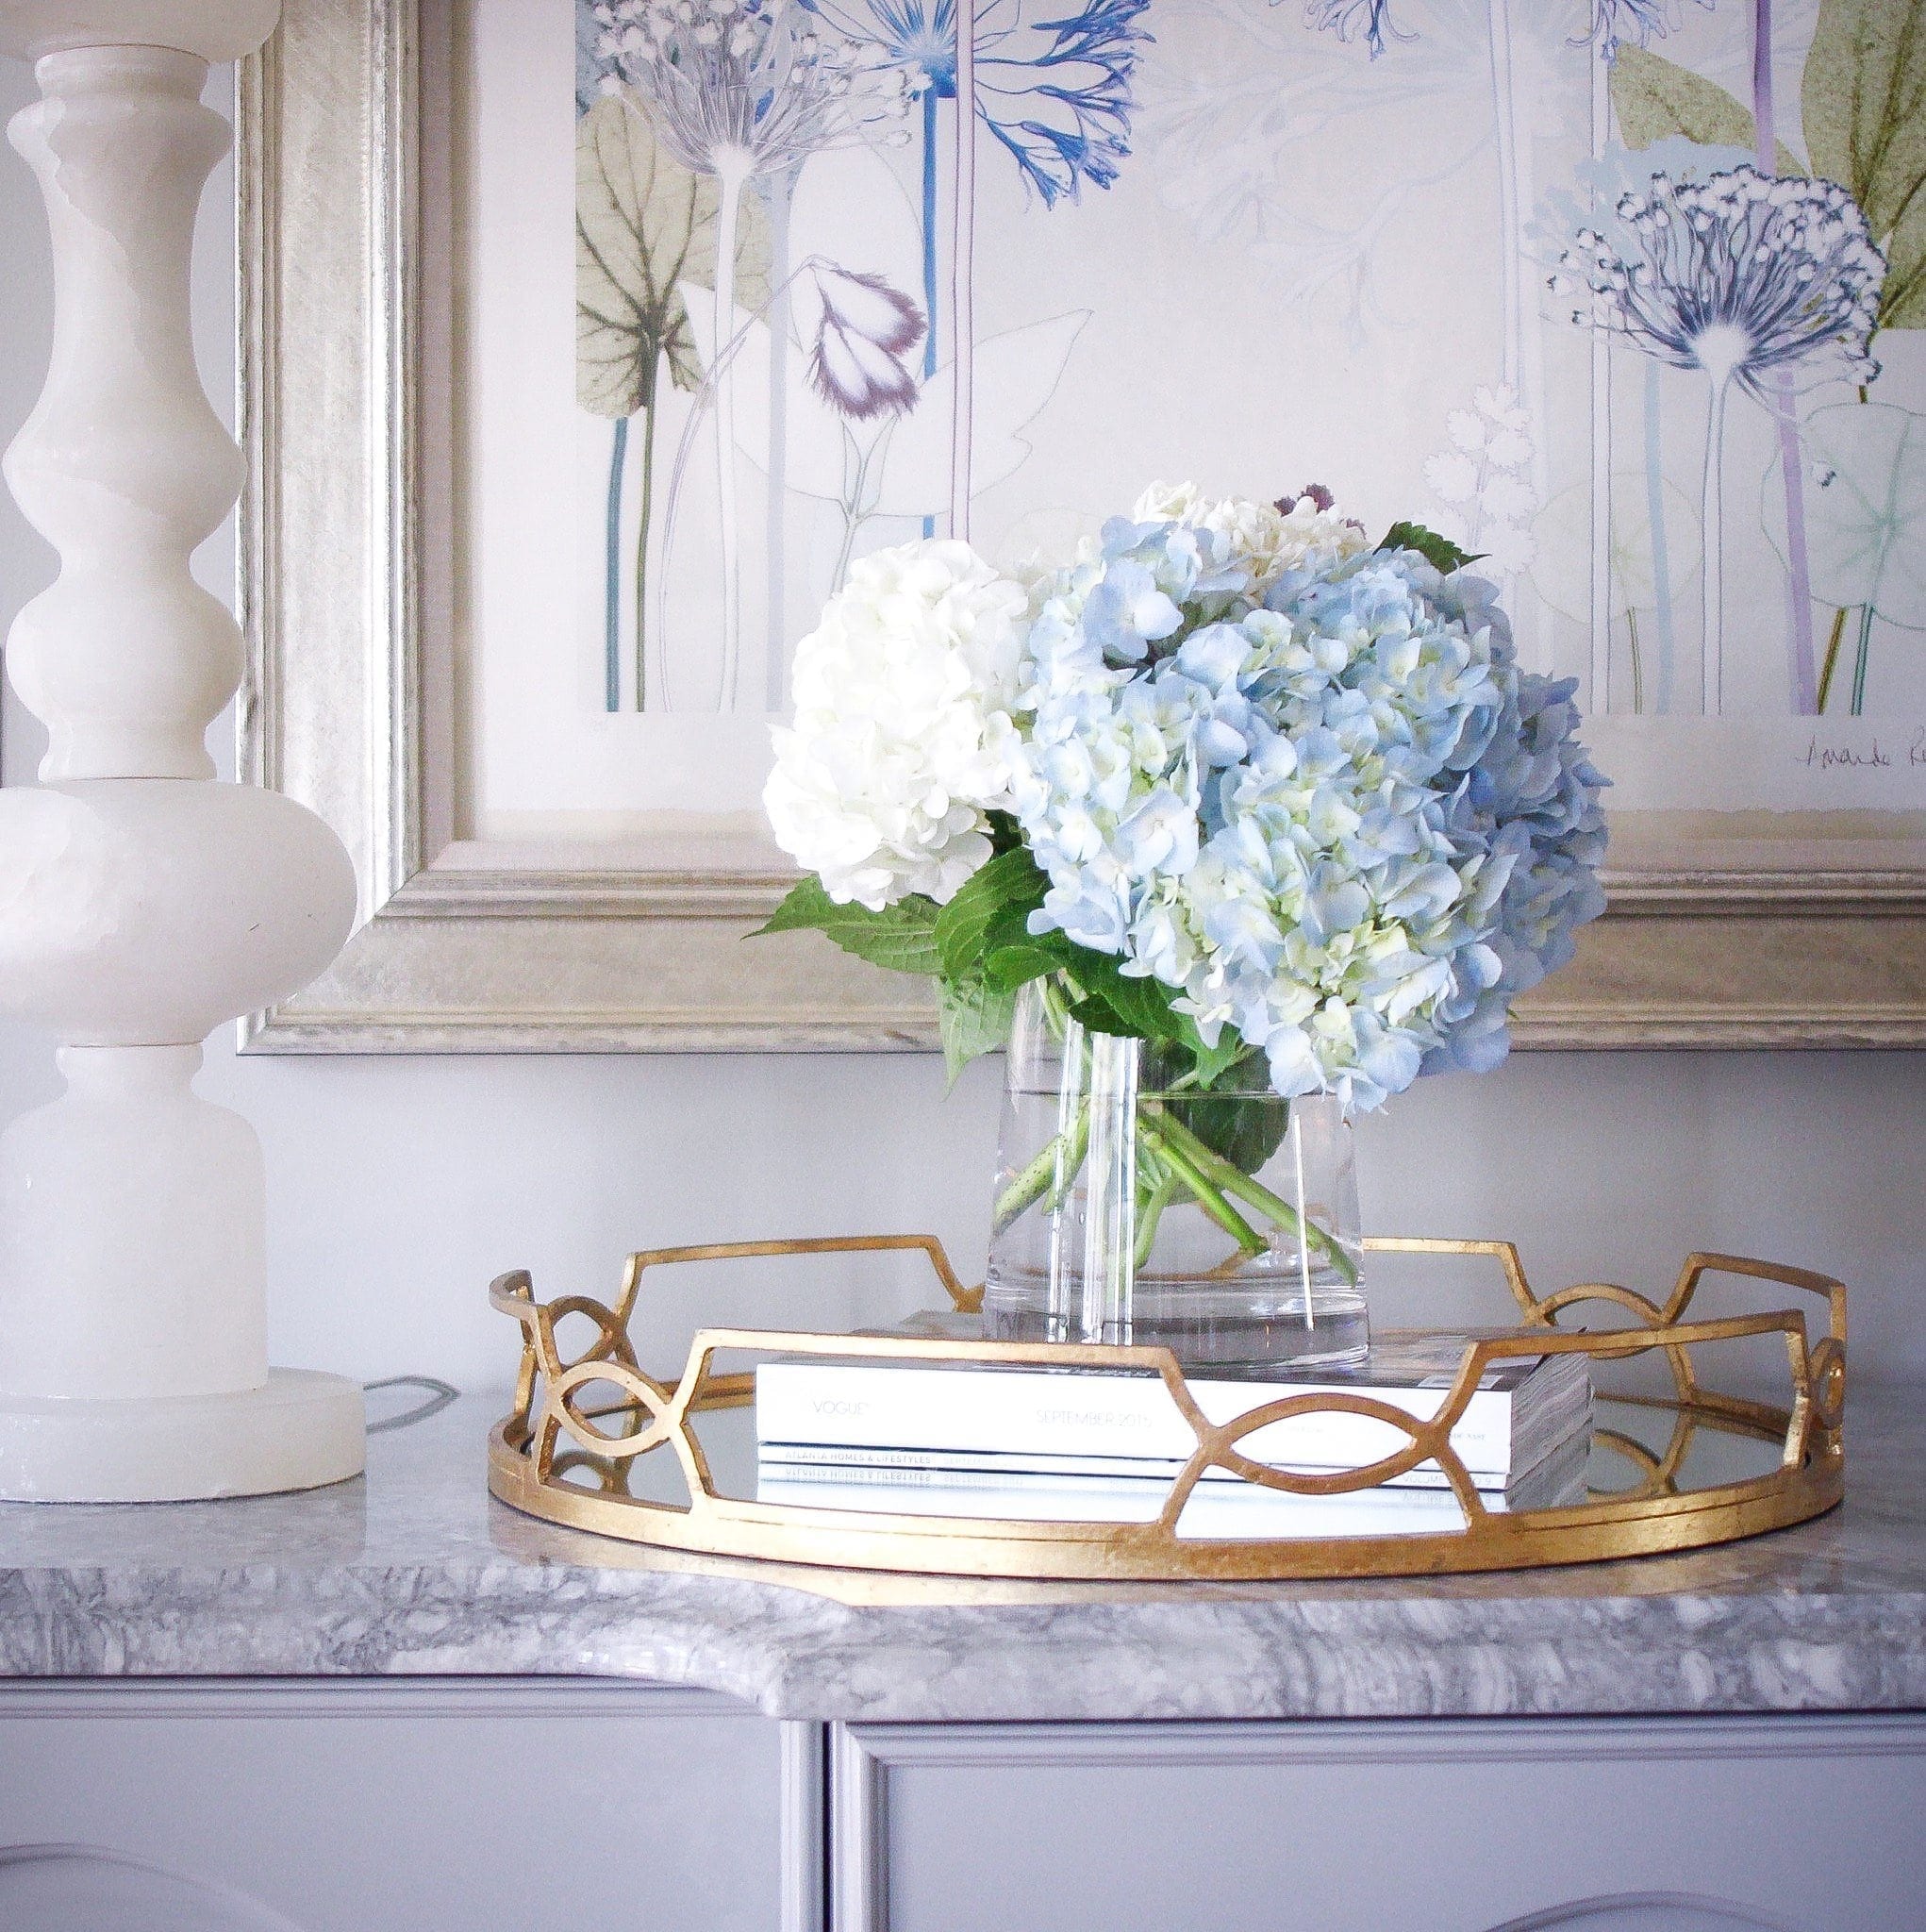 Simple hydrangea arrangement for buffet tables Gold tray and marble white lamps to add light.